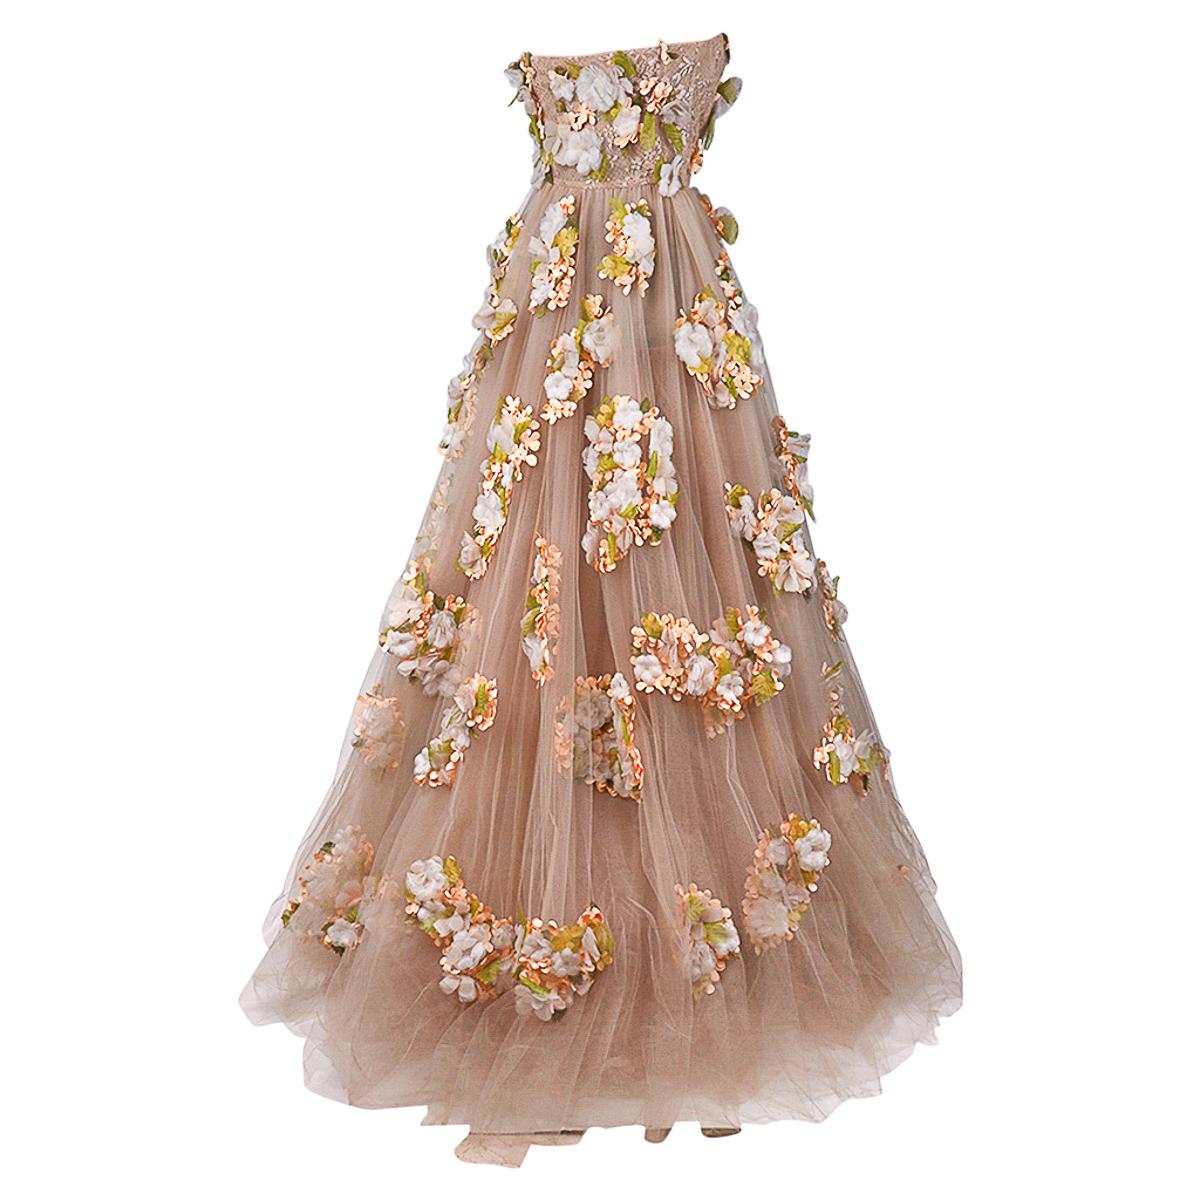 Valentino Strapless Empire Nude Flower Adorned Gown 1 of 2 Size 0 3